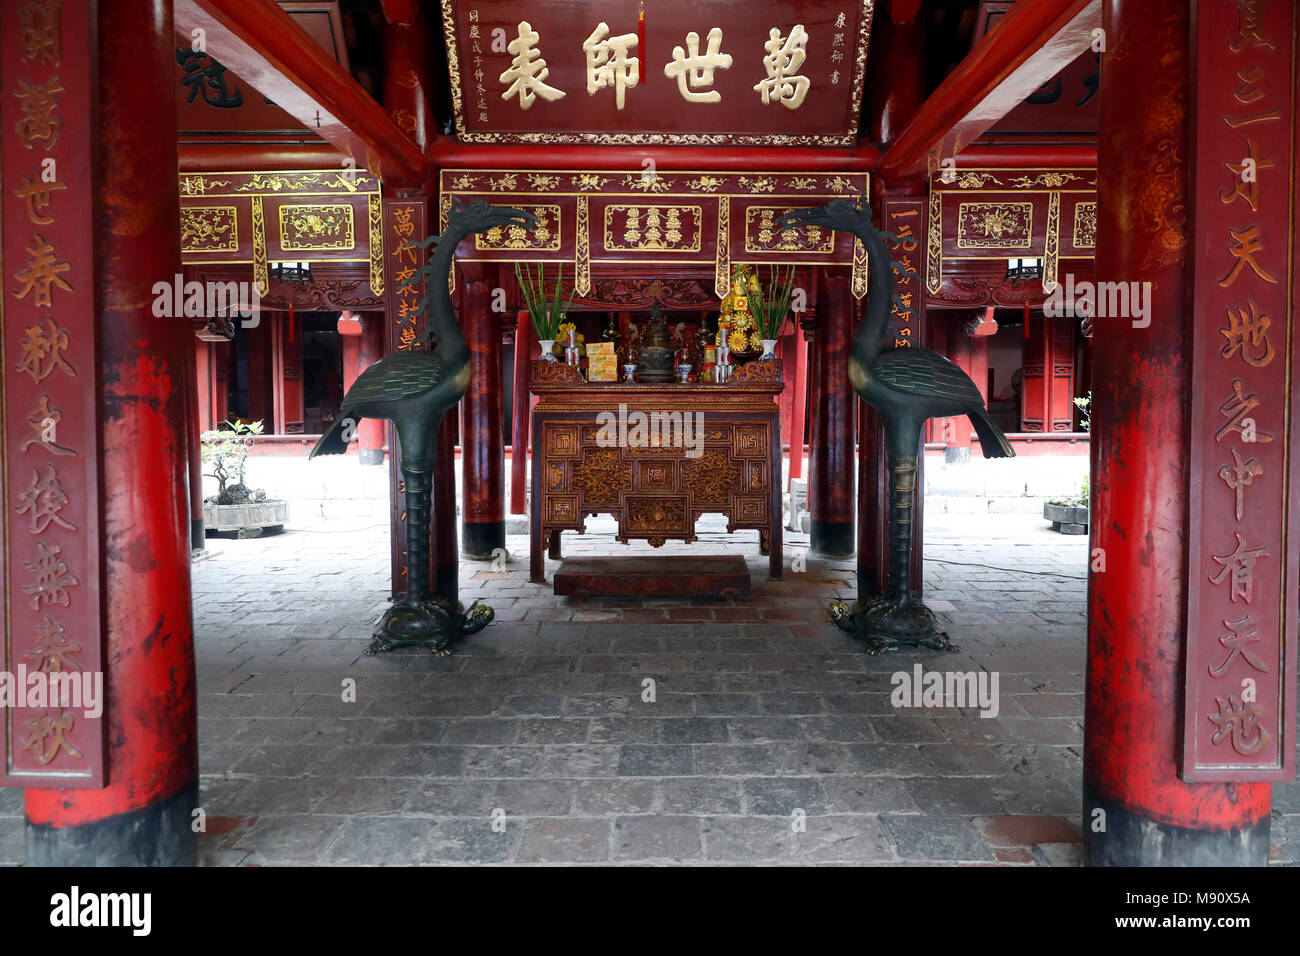 The Temple of Literature is Confucian temple which was formerly a center of learning in Hanoi.   Altar of Confucius.  Hanoi. Vietnam. Stock Photo